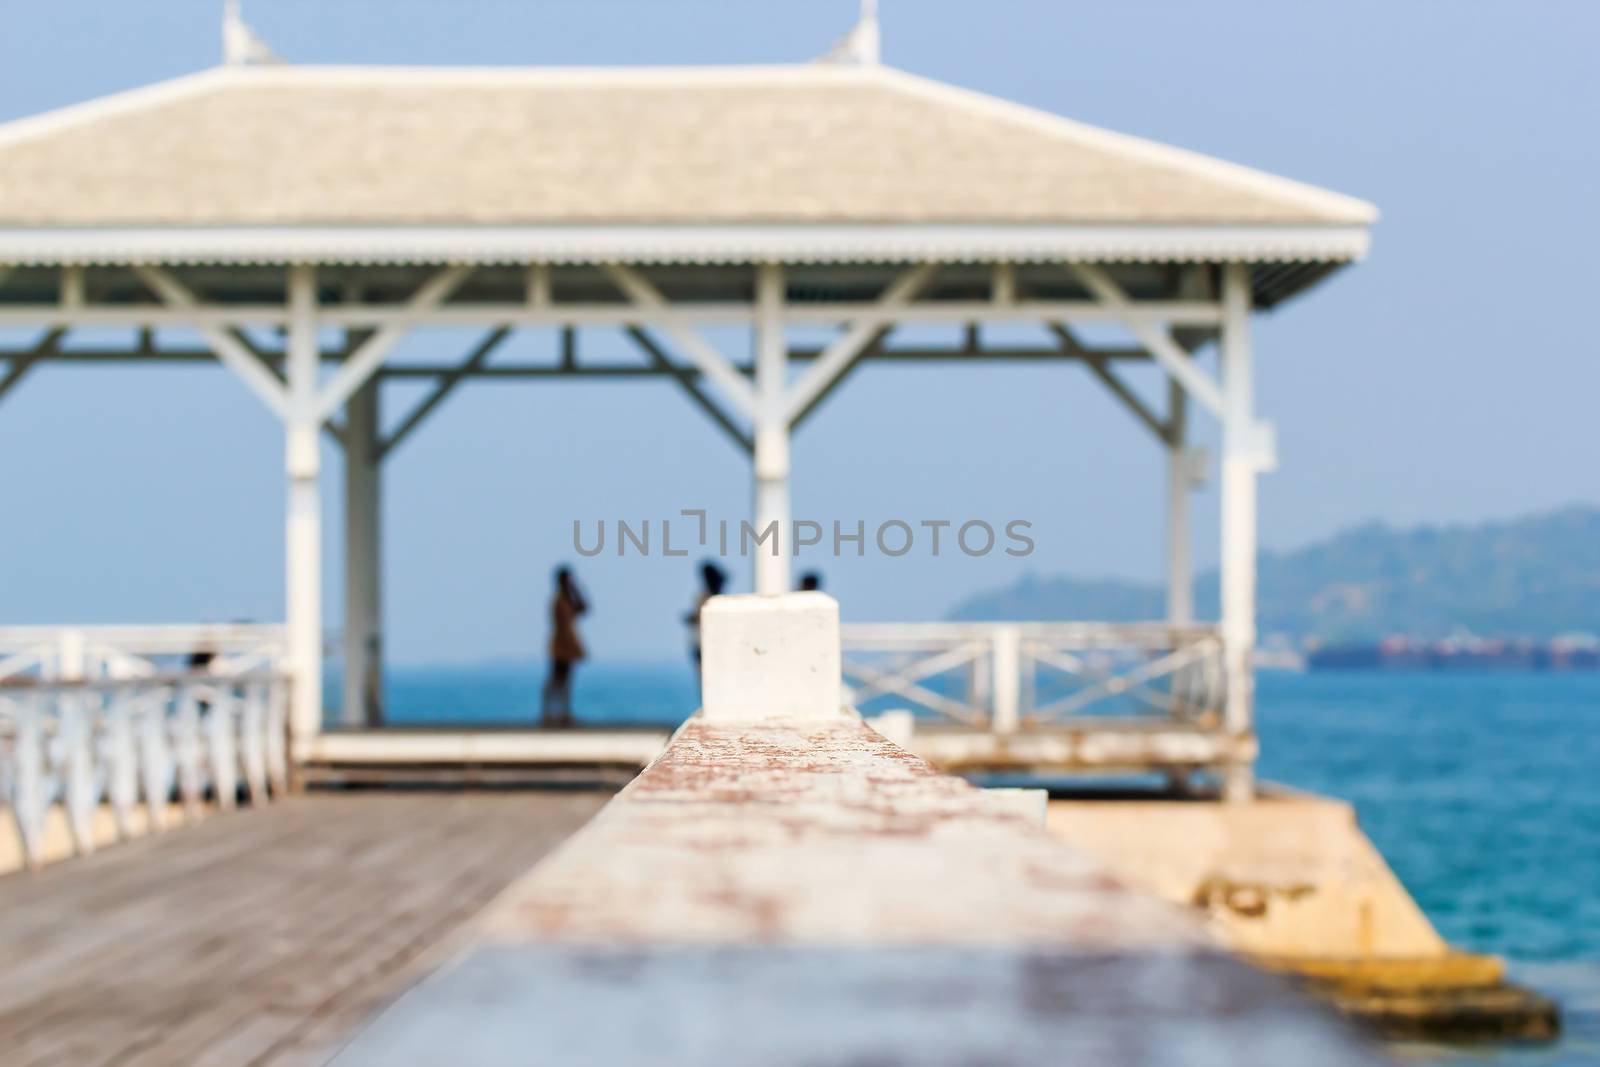 Pavilion made ������of wood in the middle of the sea.